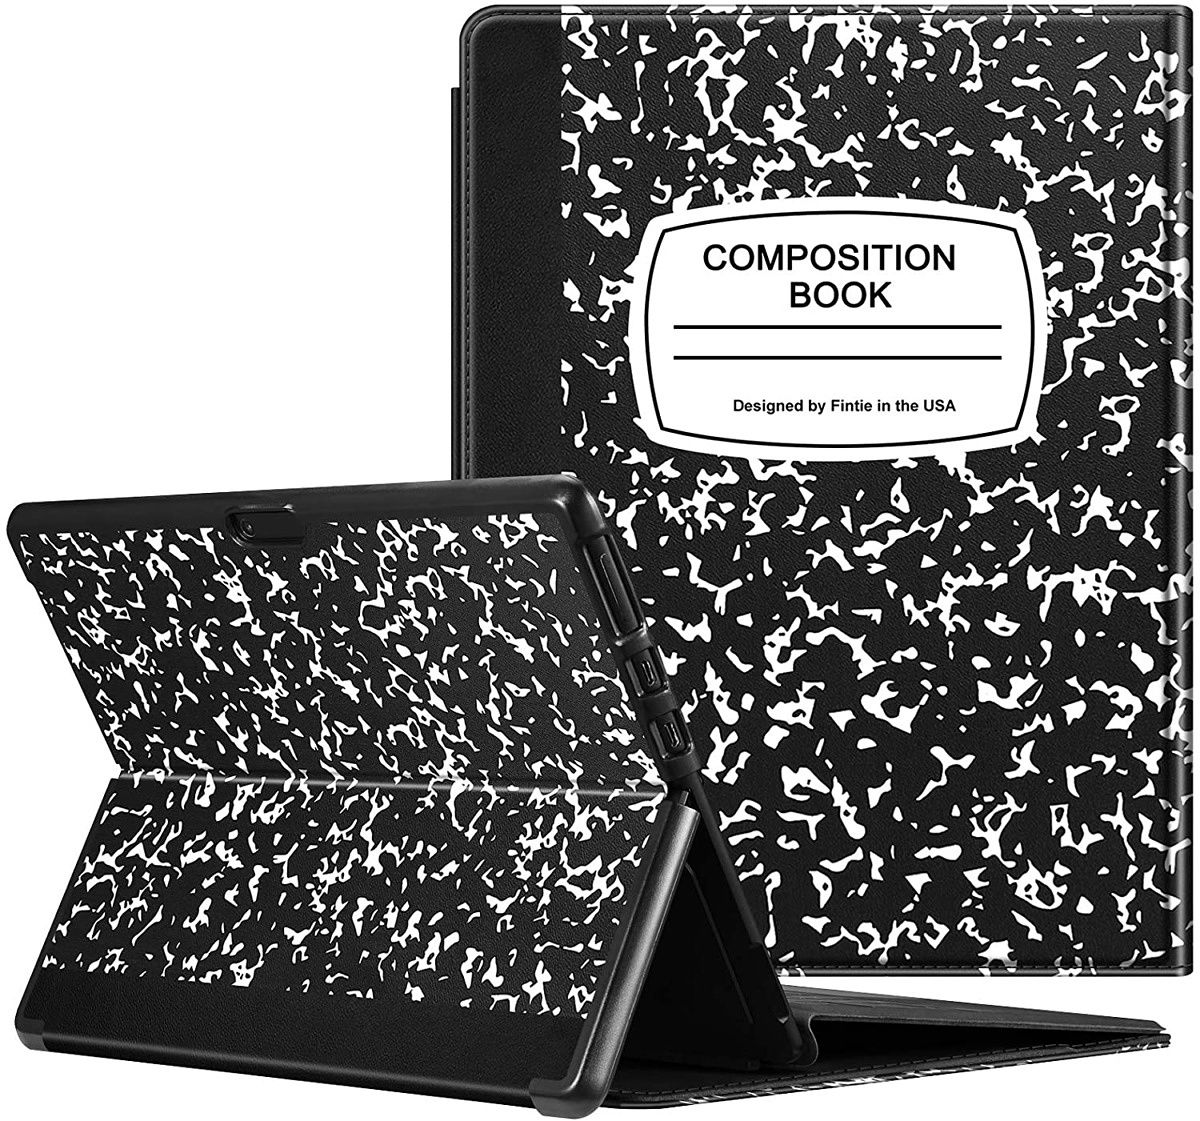 This is another hard-shell folio case that wraps around the Surface Pro X. It has cutouts for everything you need and a holder for the Surface Pen. It also comes in a couple of different designs to suit your taste, including notebook-style look.